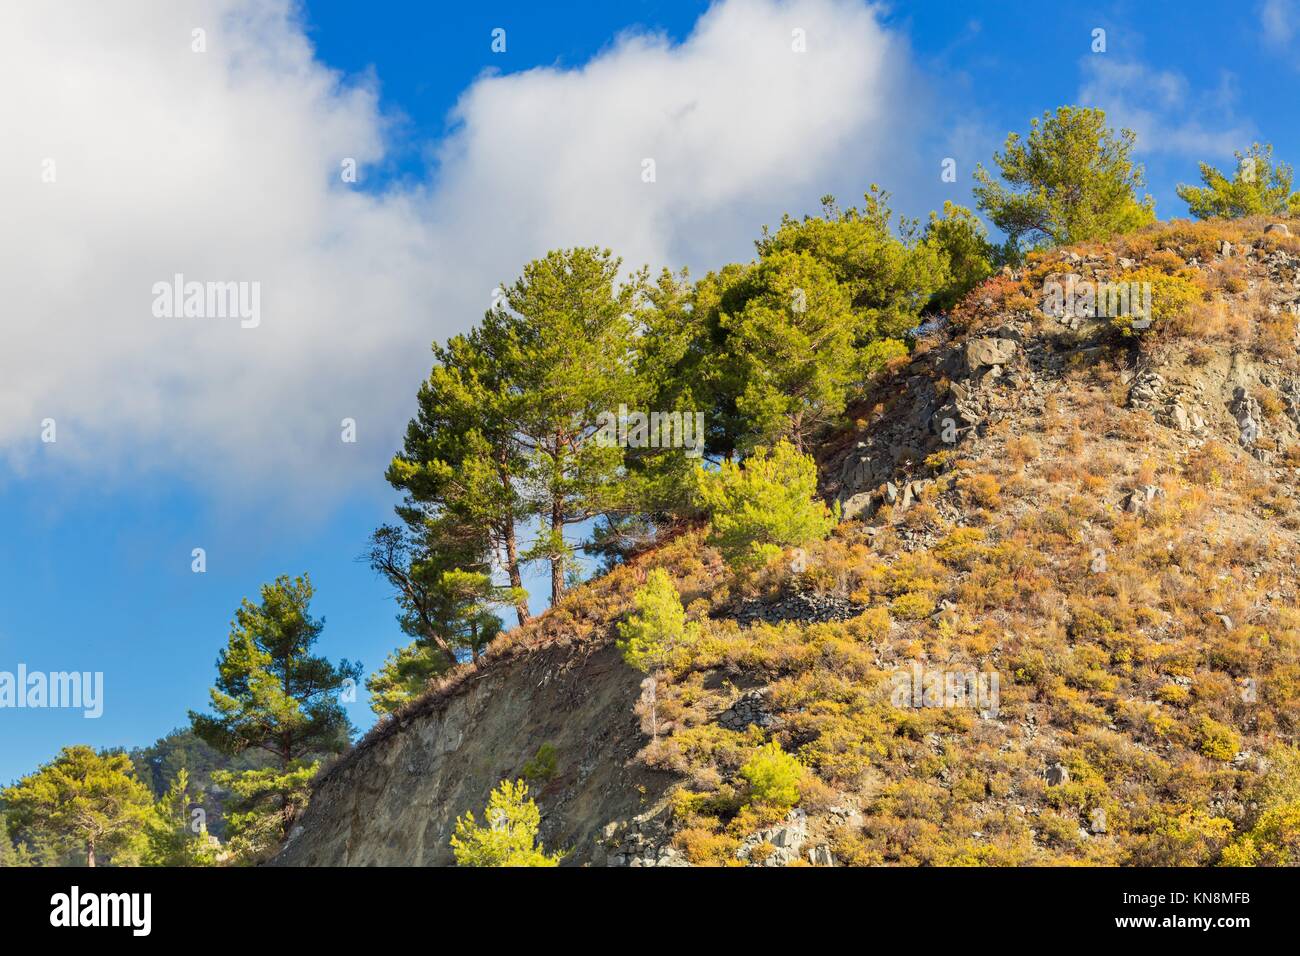 Landscape with hills and bushes in Troodos mountains Cyprus. Stock Photo